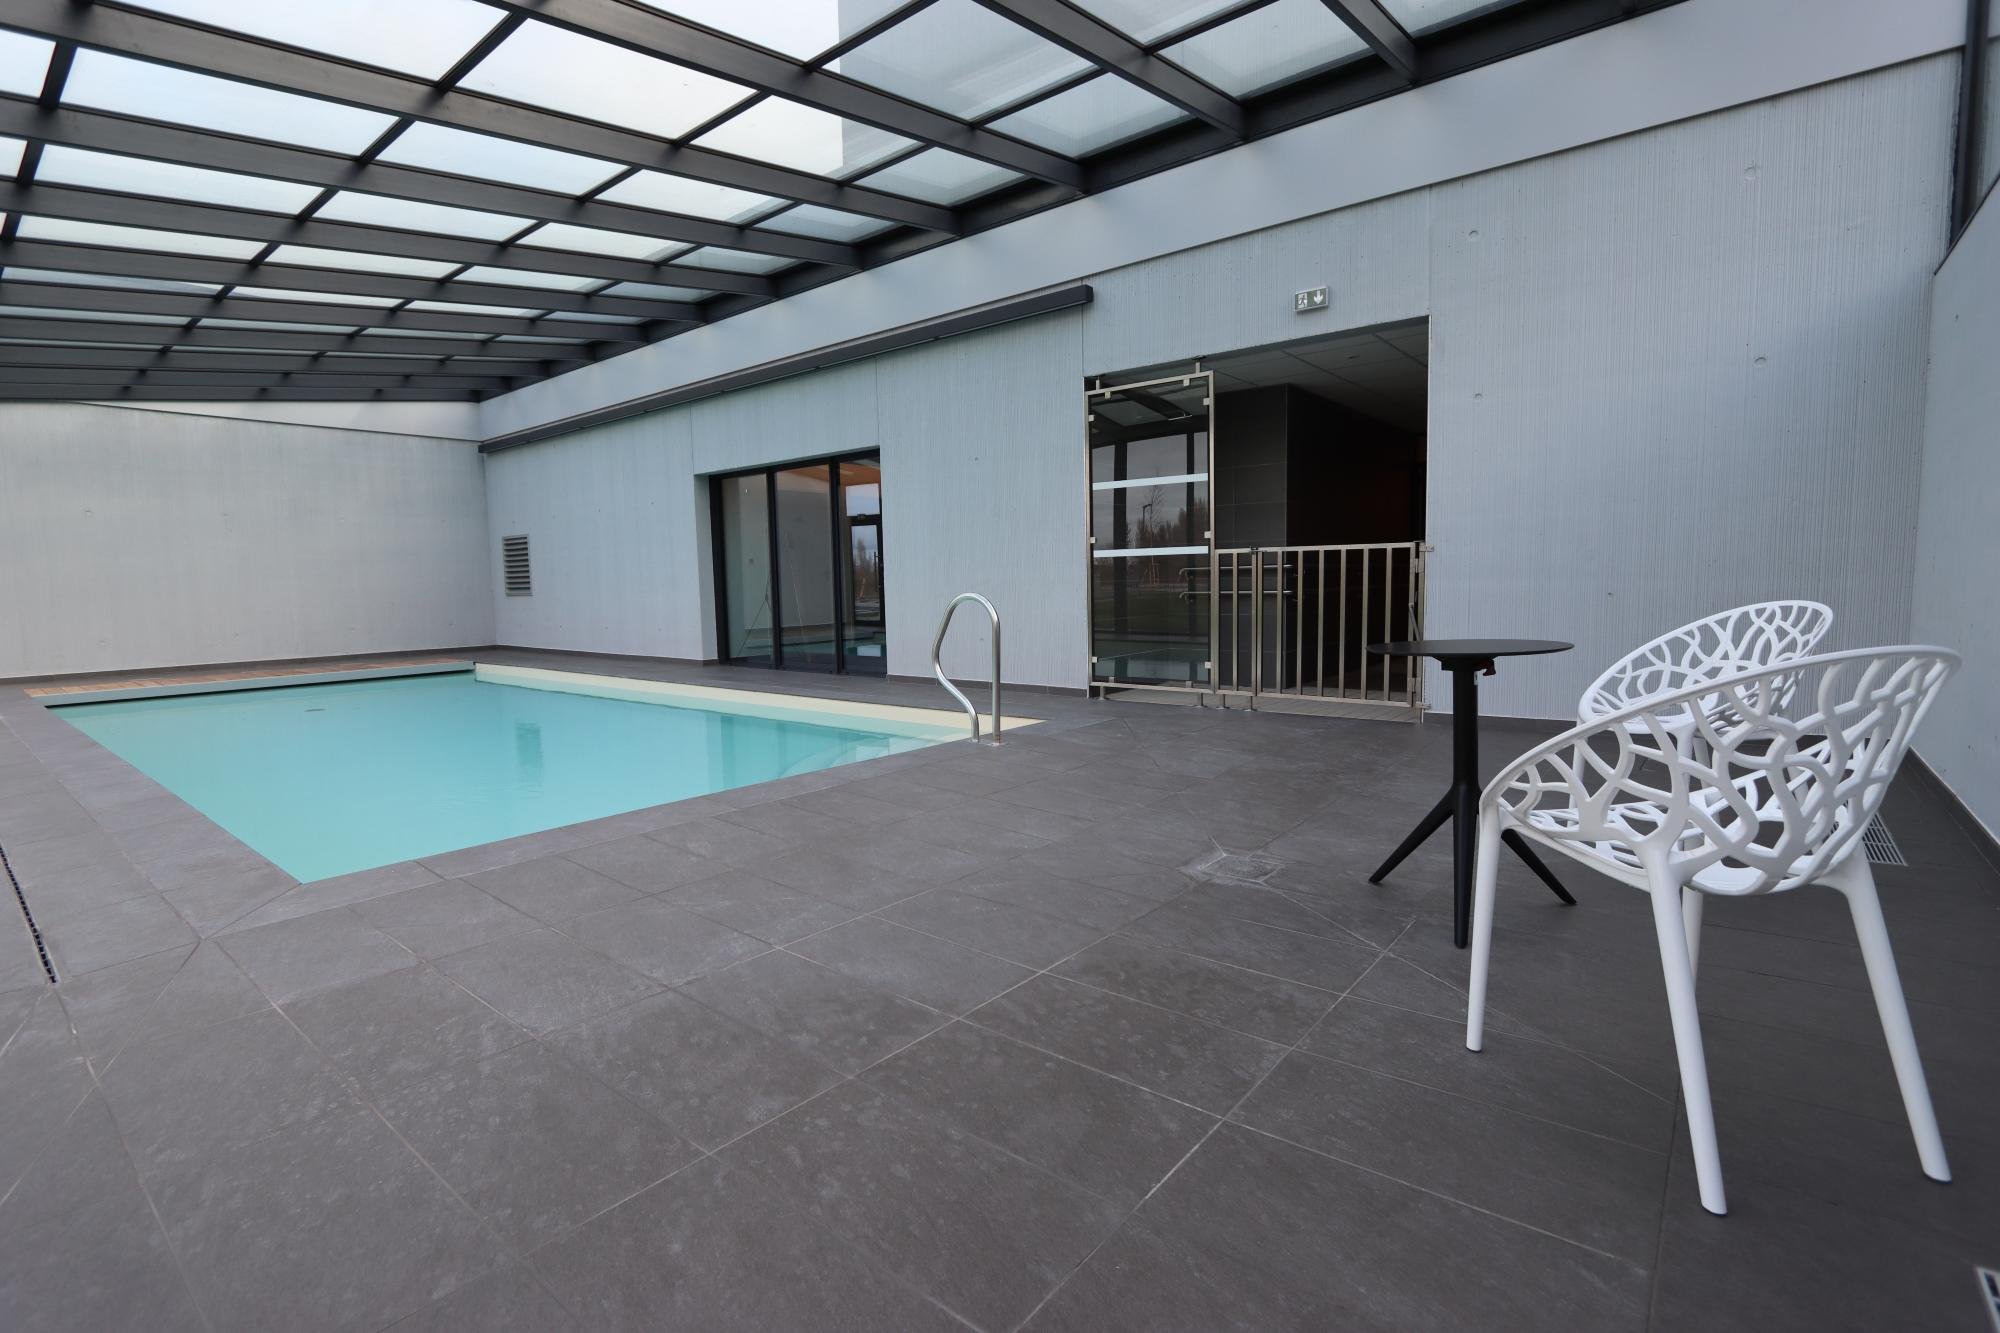 Hotel Eden Spa | Family room access spa and indoor pool